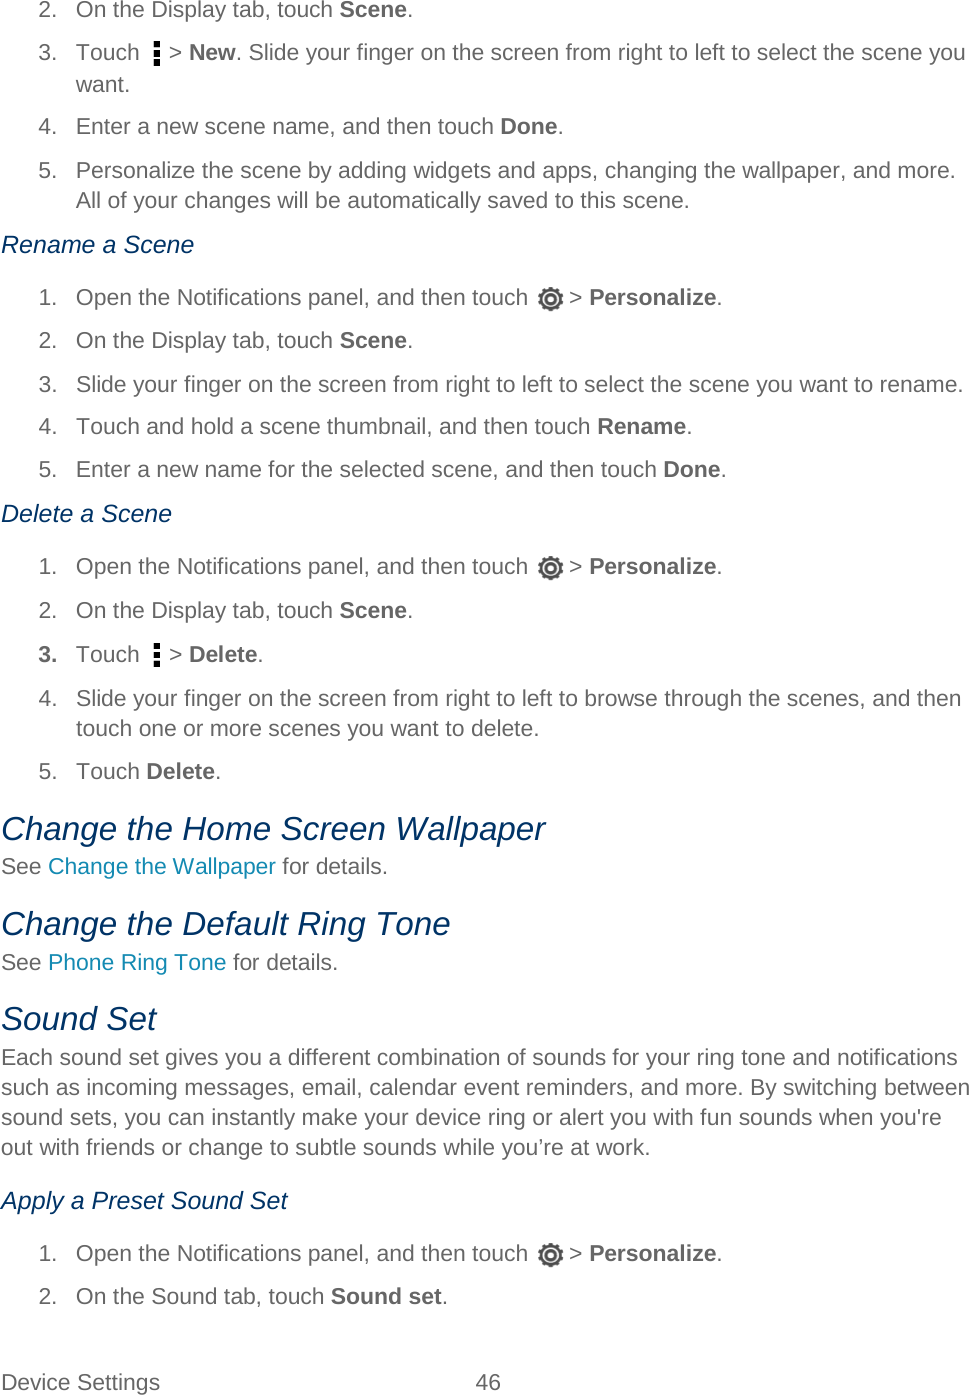  Device Settings 46   2. On the Display tab, touch Scene. 3. Touch   &gt; New. Slide your finger on the screen from right to left to select the scene you want. 4. Enter a new scene name, and then touch Done. 5. Personalize the scene by adding widgets and apps, changing the wallpaper, and more. All of your changes will be automatically saved to this scene. Rename a Scene 1. Open the Notifications panel, and then touch   &gt; Personalize. 2. On the Display tab, touch Scene. 3. Slide your finger on the screen from right to left to select the scene you want to rename. 4. Touch and hold a scene thumbnail, and then touch Rename. 5. Enter a new name for the selected scene, and then touch Done. Delete a Scene 1. Open the Notifications panel, and then touch   &gt; Personalize. 2. On the Display tab, touch Scene. 3. Touch   &gt; Delete. 4. Slide your finger on the screen from right to left to browse through the scenes, and then touch one or more scenes you want to delete. 5.  Touch Delete. Change the Home Screen Wallpaper See Change the Wallpaper for details. Change the Default Ring Tone See Phone Ring Tone for details. Sound Set Each sound set gives you a different combination of sounds for your ring tone and notifications such as incoming messages, email, calendar event reminders, and more. By switching between sound sets, you can instantly make your device ring or alert you with fun sounds when you&apos;re out with friends or change to subtle sounds while you’re at work. Apply a Preset Sound Set 1. Open the Notifications panel, and then touch   &gt; Personalize. 2. On the Sound tab, touch Sound set. 